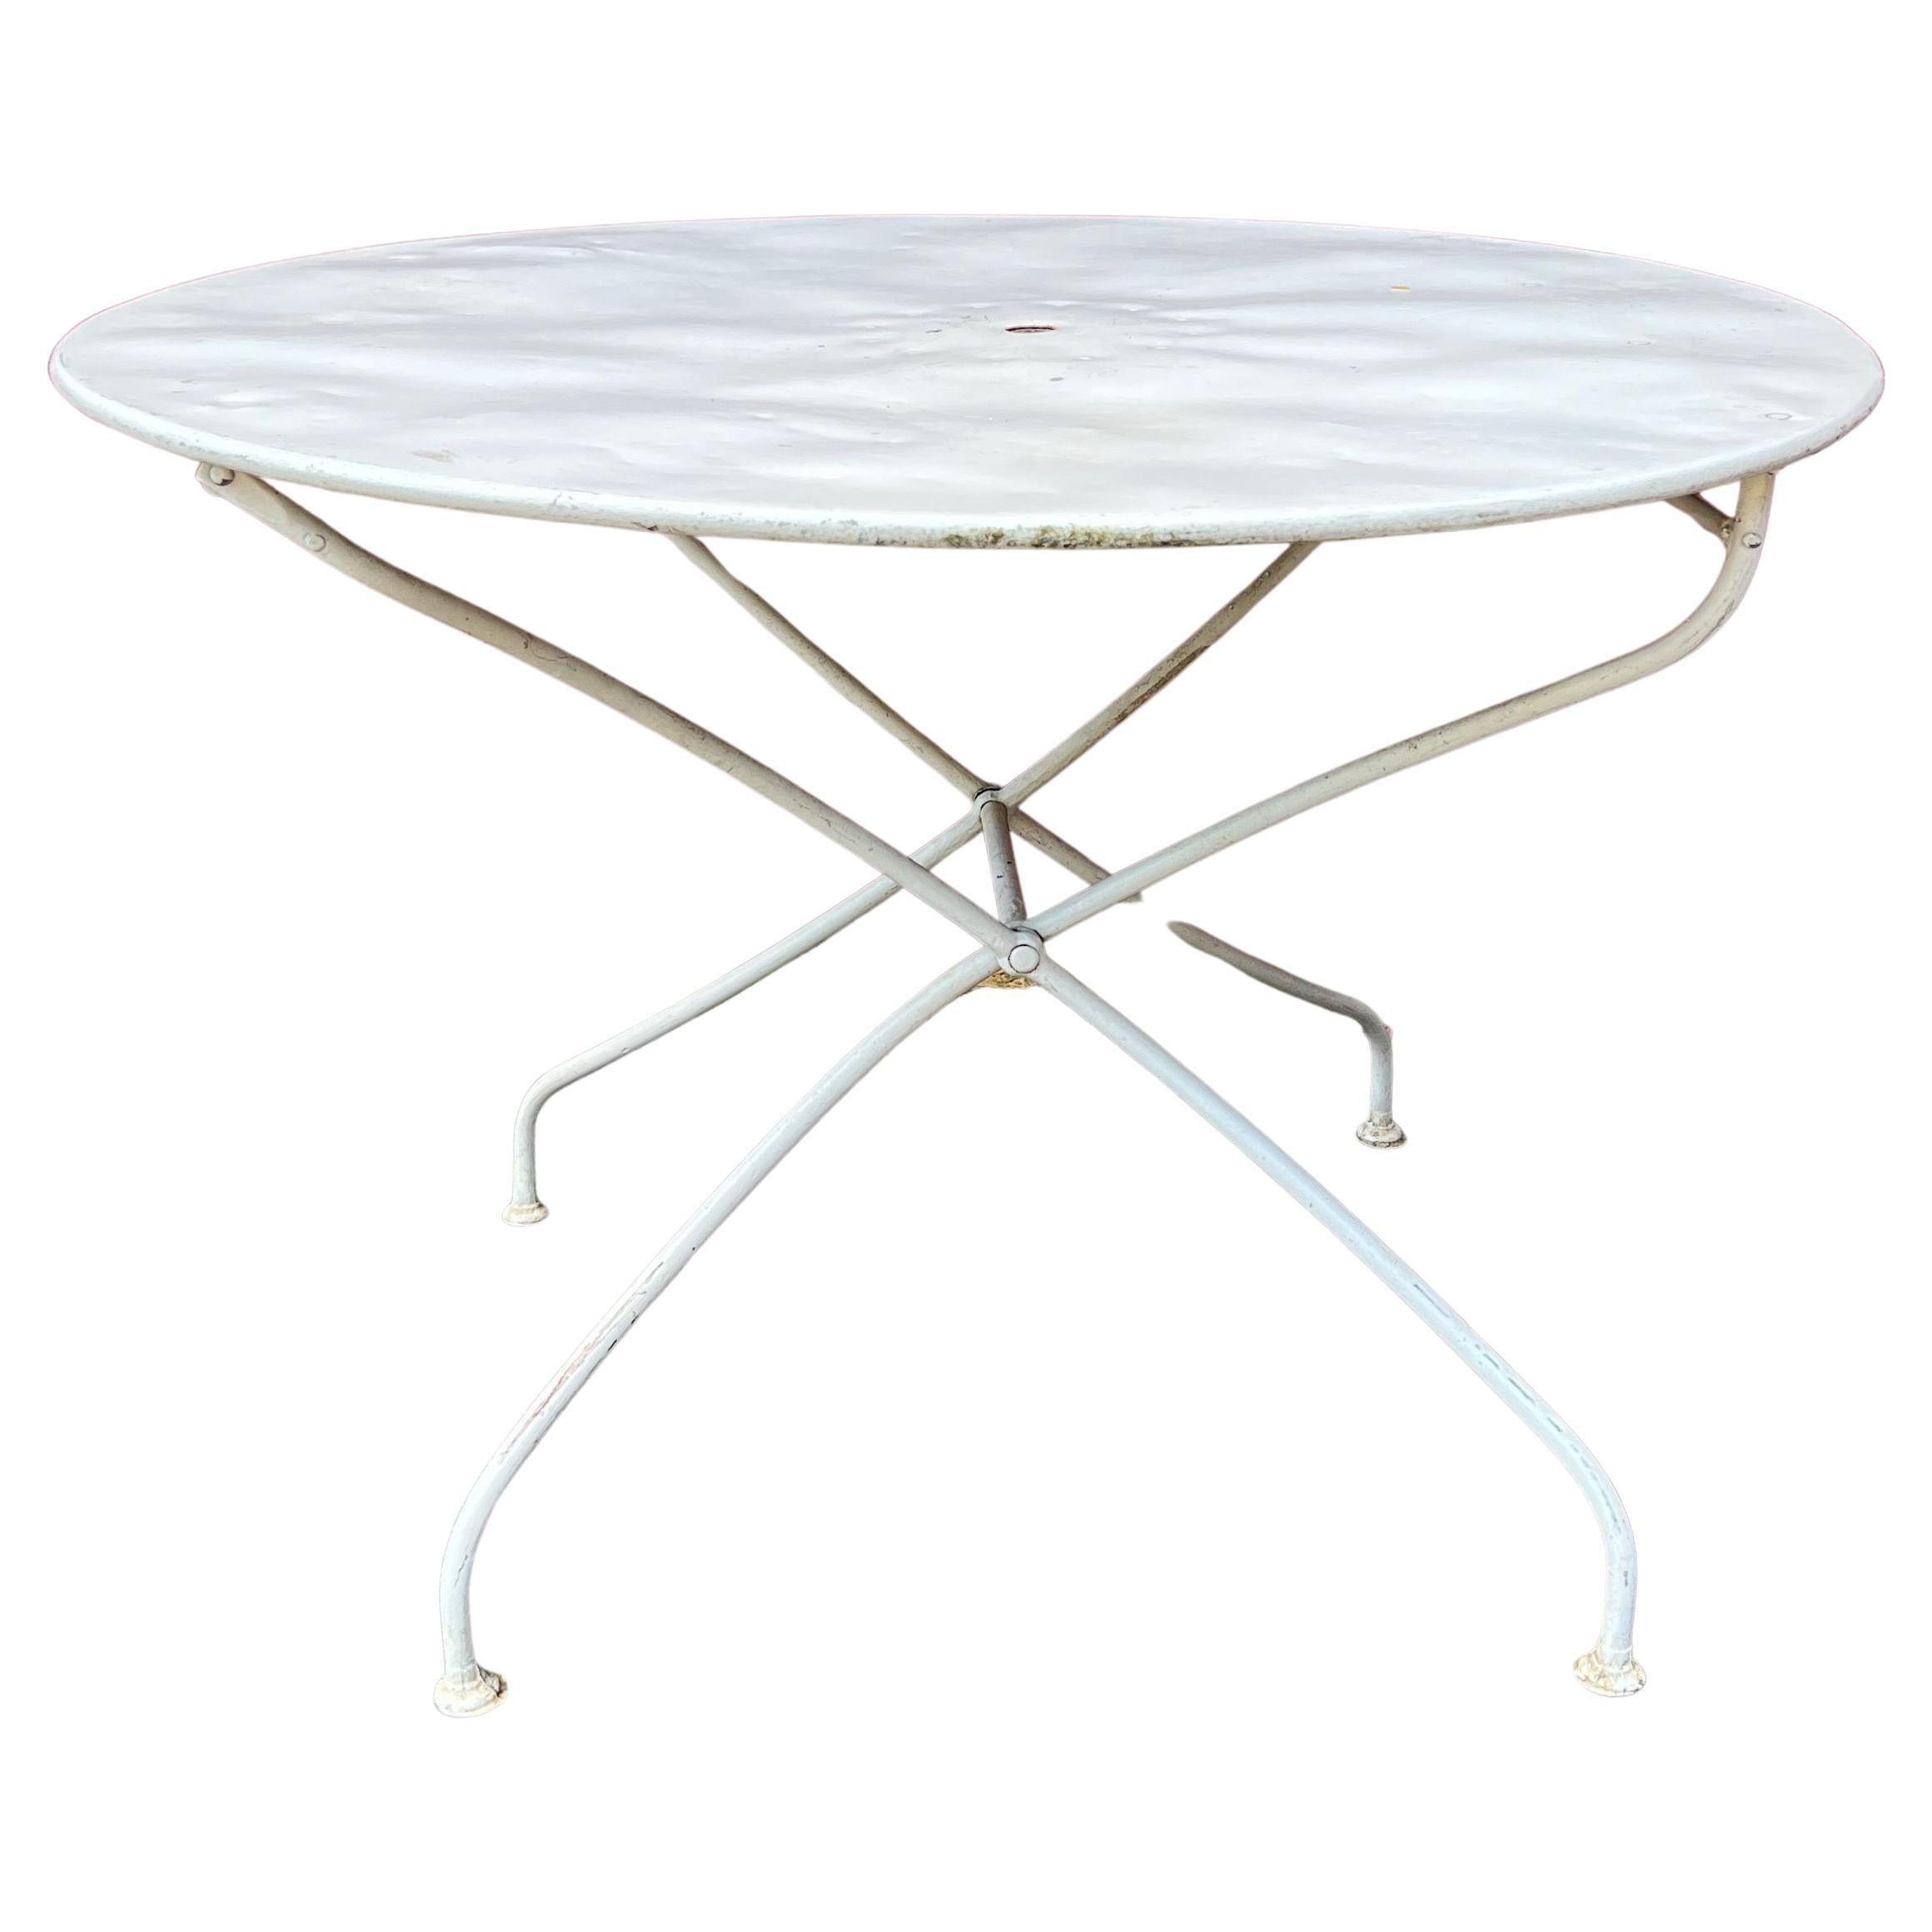 Painted French Folding Garden Table For Sale